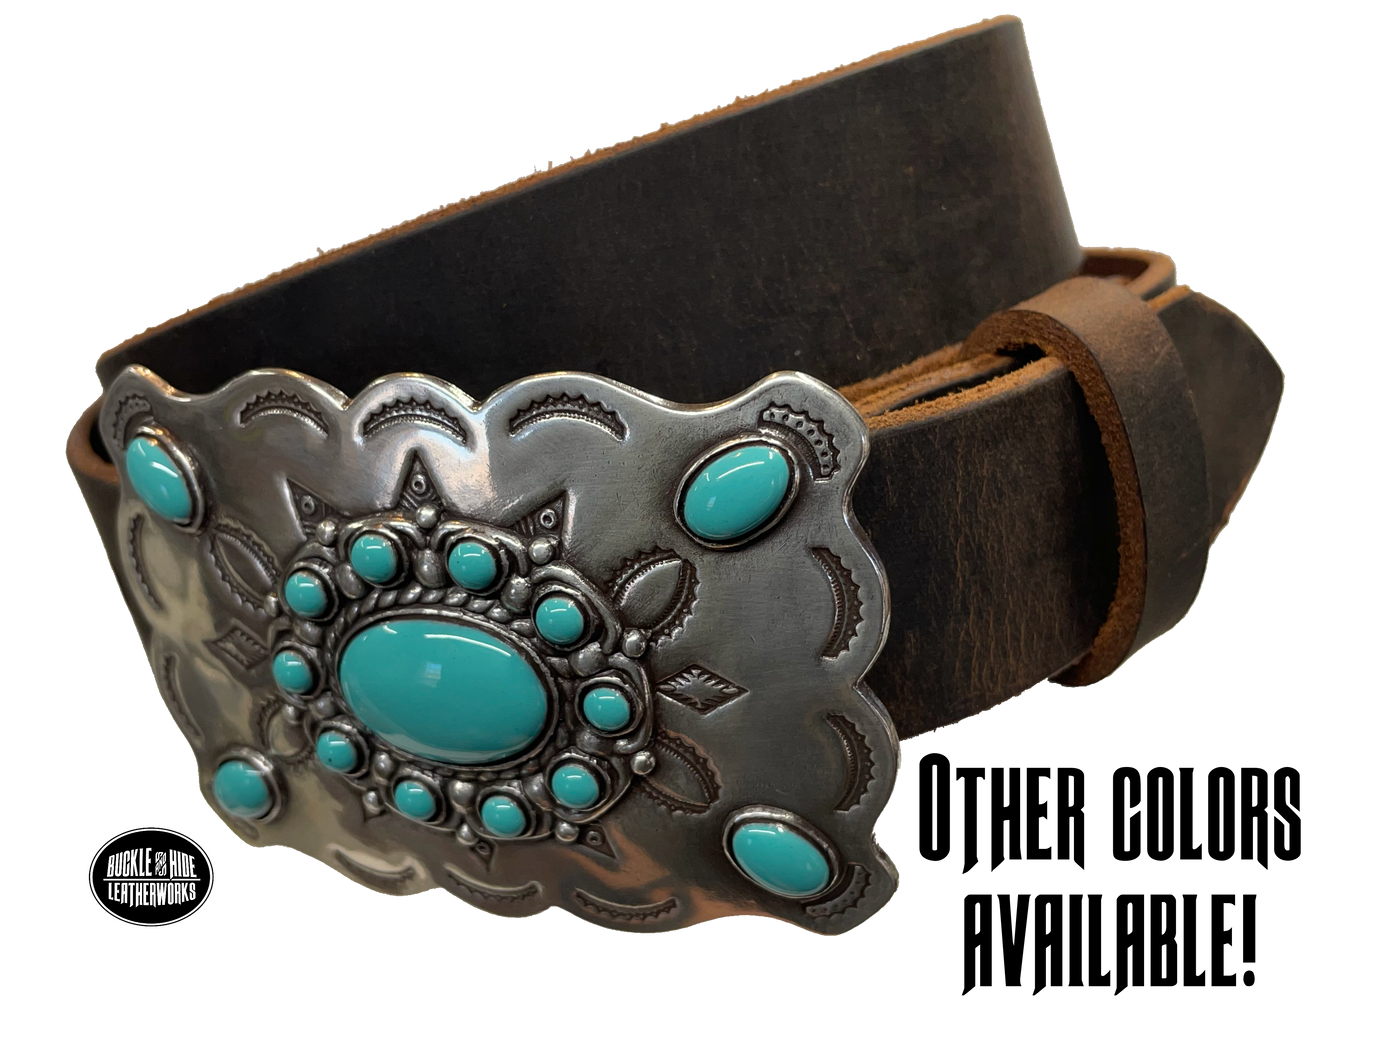 Southwestern style belt buckle with Southwestern tooling, scalloped design around edges, and simulated turquoise stones, approx. size 3 1/2" wide by 2 1/2" tall.  Color is antique silver, buckle is made of zinc. Fits belts 1 1/2" wide. Belt is handmade from a single strip of leather, choose from either distressed brown, black, or dark brown. CHOOSE ONE BELT STRIP COLOR! Available online and in our shop just outside Nashville in Smyrna, TN. Main photo.